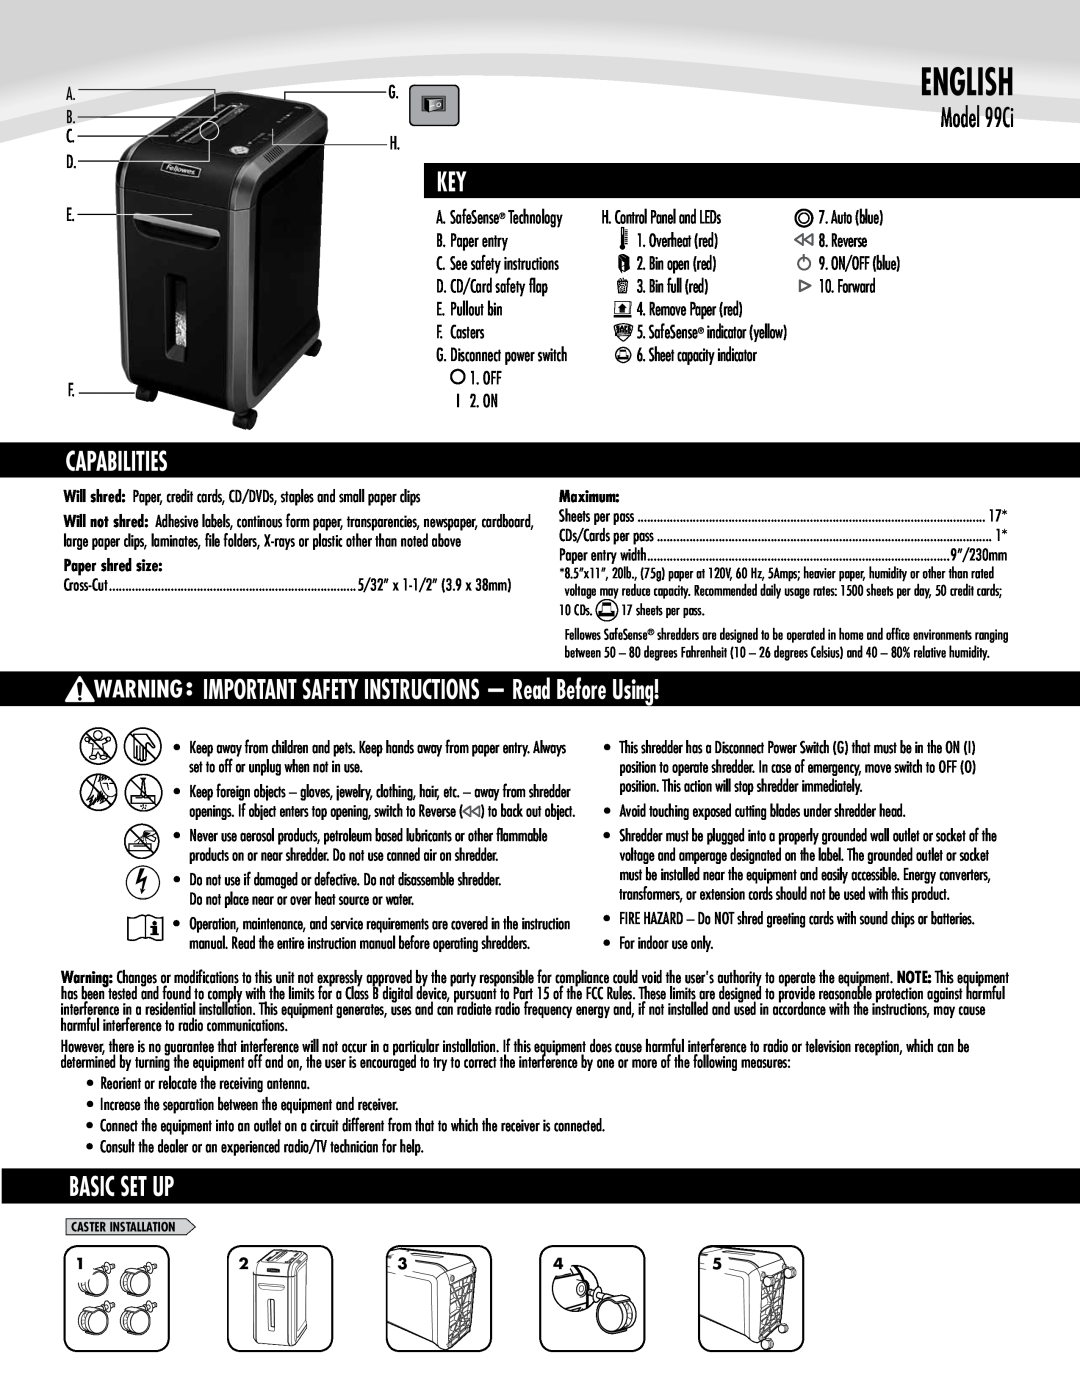 Fellowes 3229901 manual English, Capabilities, Model 99Ci, IMPORTANT SAFETY INSTRUCTIONS - Read Before Using, Basic Set Up 